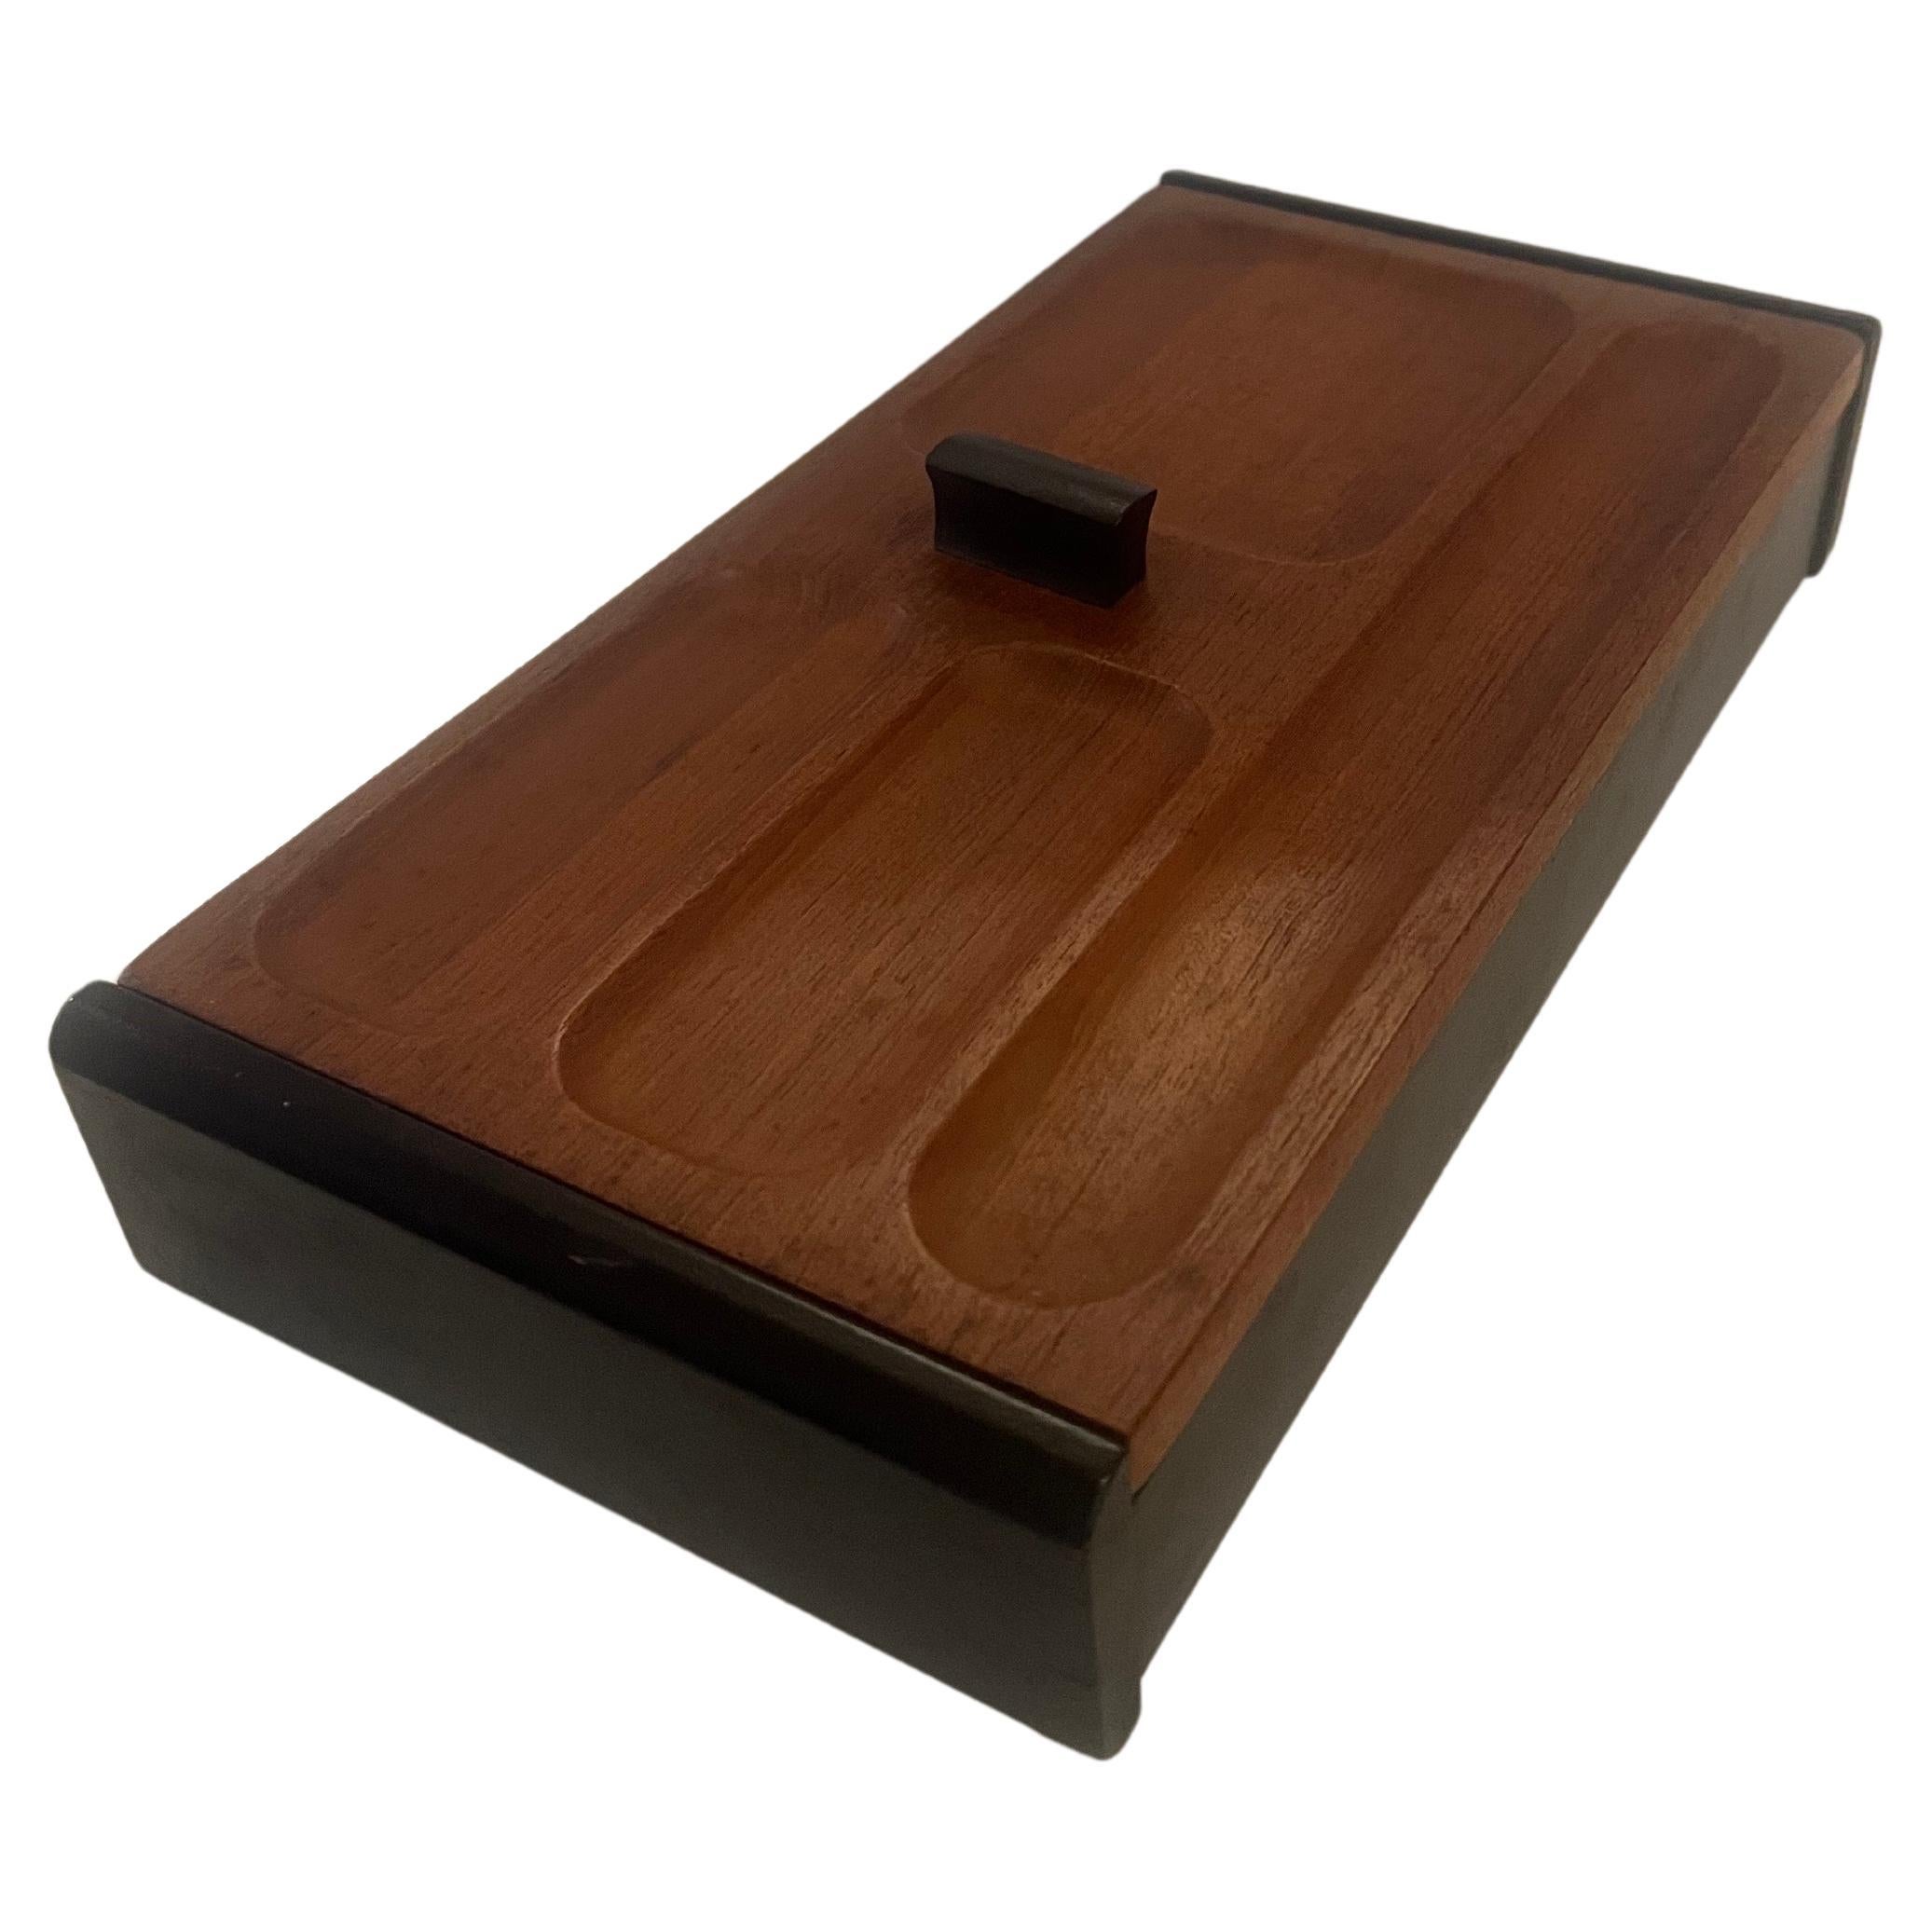 Danish Modern Solid Teak Desk Top Jewelry Box Made in Japan In Good Condition For Sale In San Diego, CA